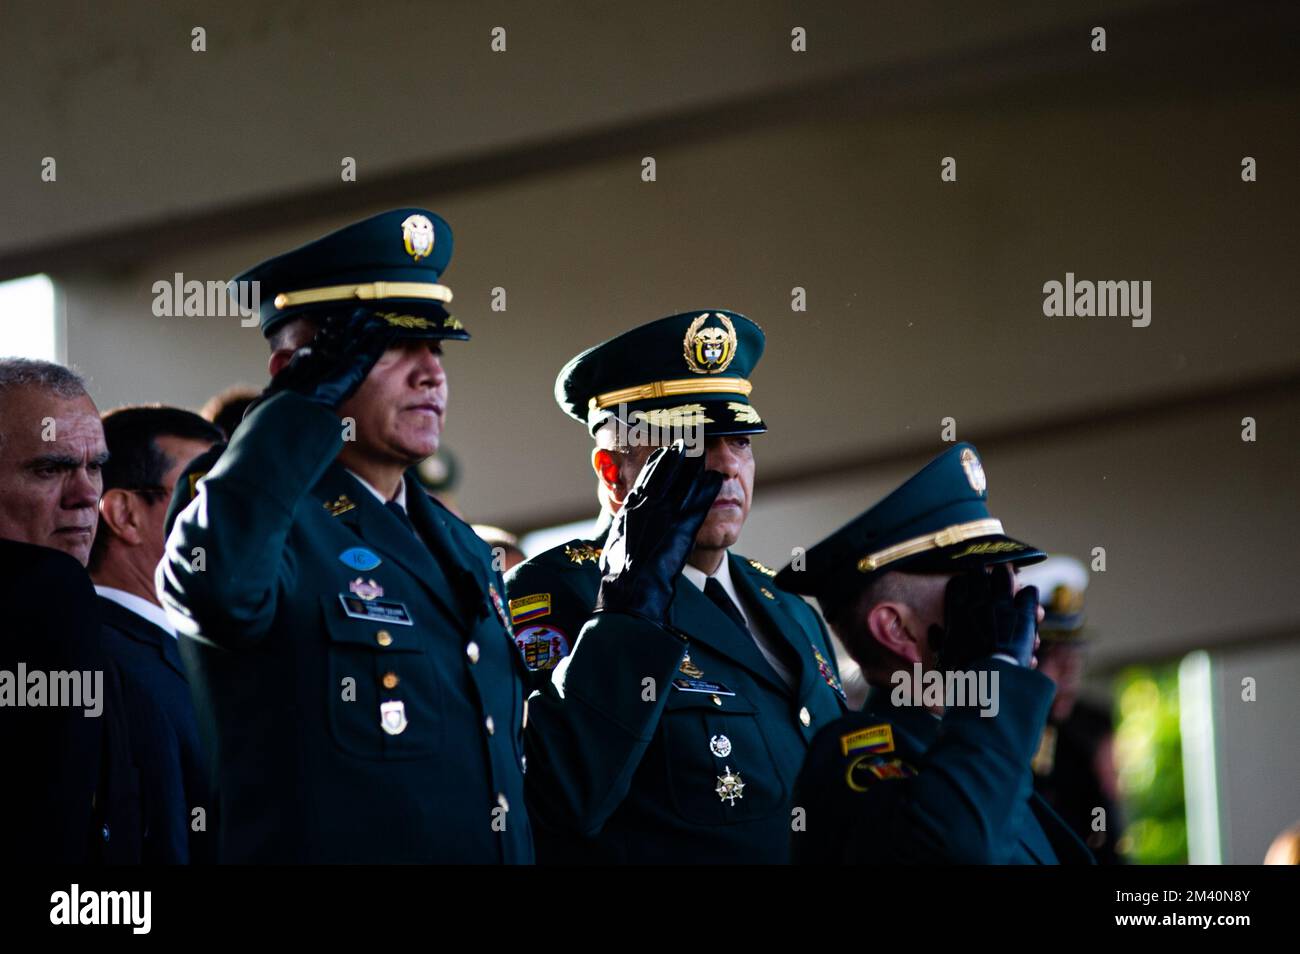 Bogota, Colombia. 17th Dec, 2022. Colombian army brigadier generals during the promotion ceremony of new Generals and Admirals of the Police and Military Forces at the Jose Maria Cordova Military School in Bogota, Colombia on December 17, 2022. Photo by: S. Barros/Long Visual Press Credit: Long Visual Press/Alamy Live News Stock Photo